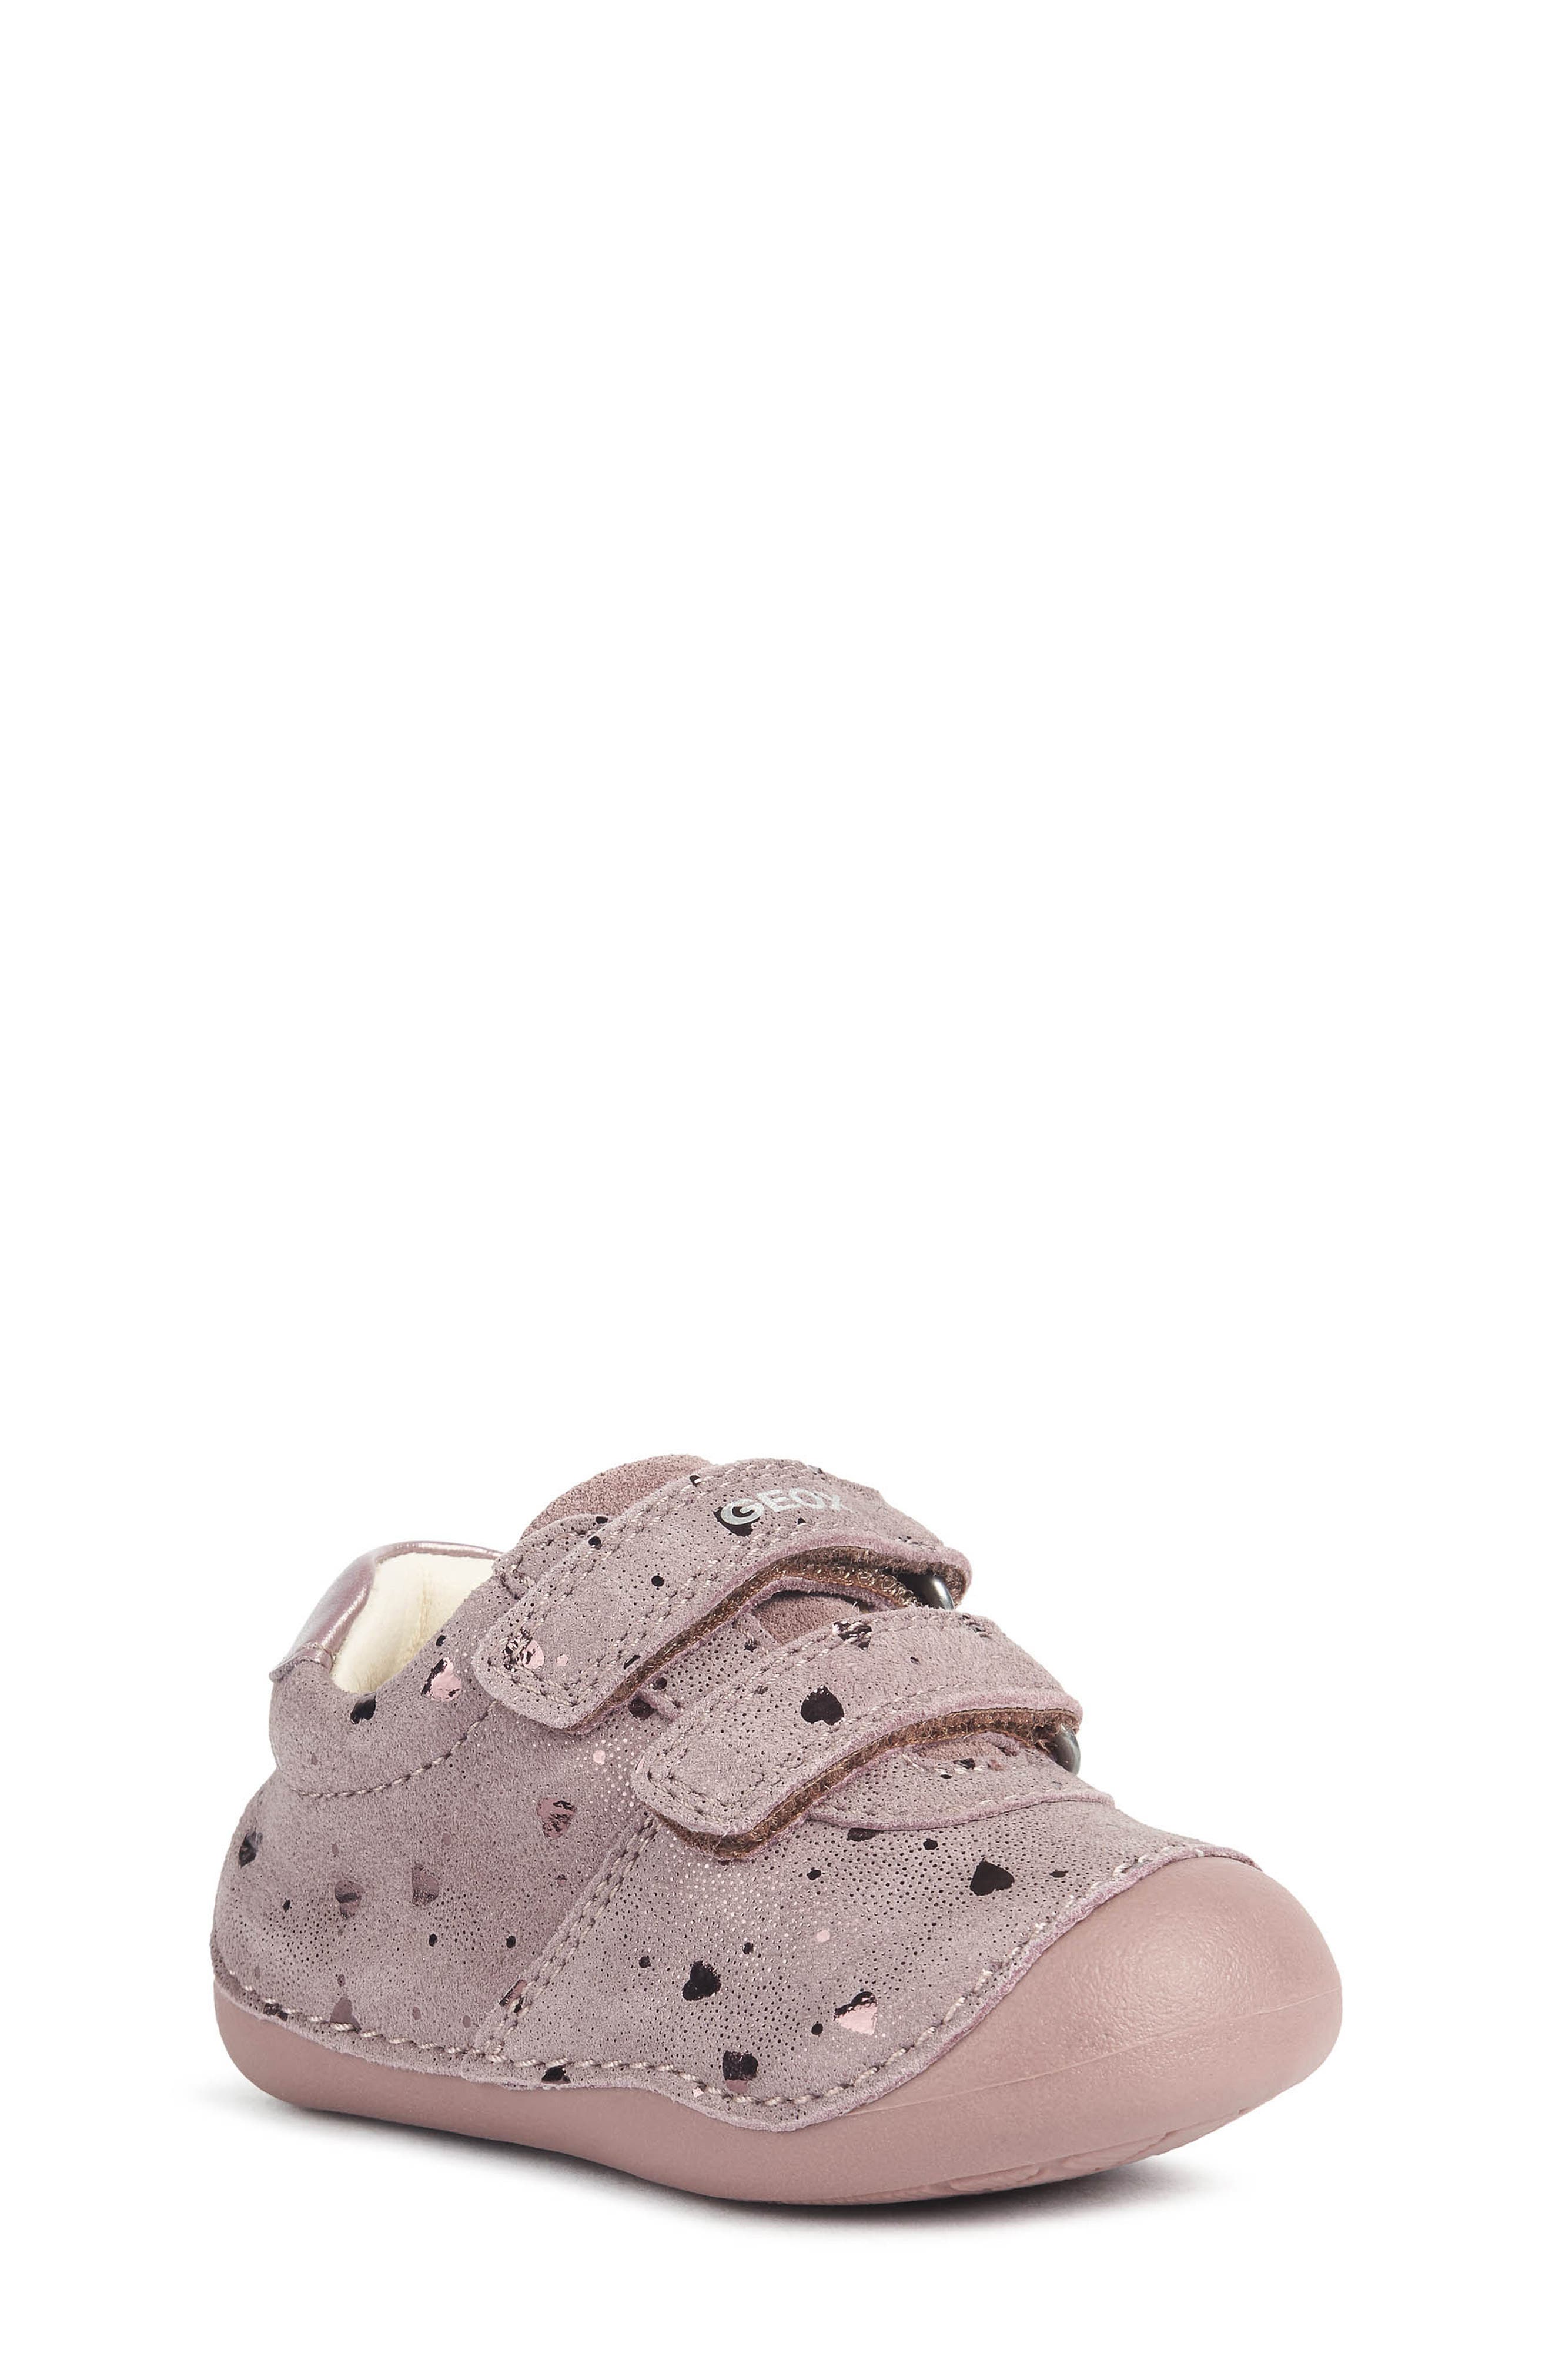 Girls' Geox Shoes